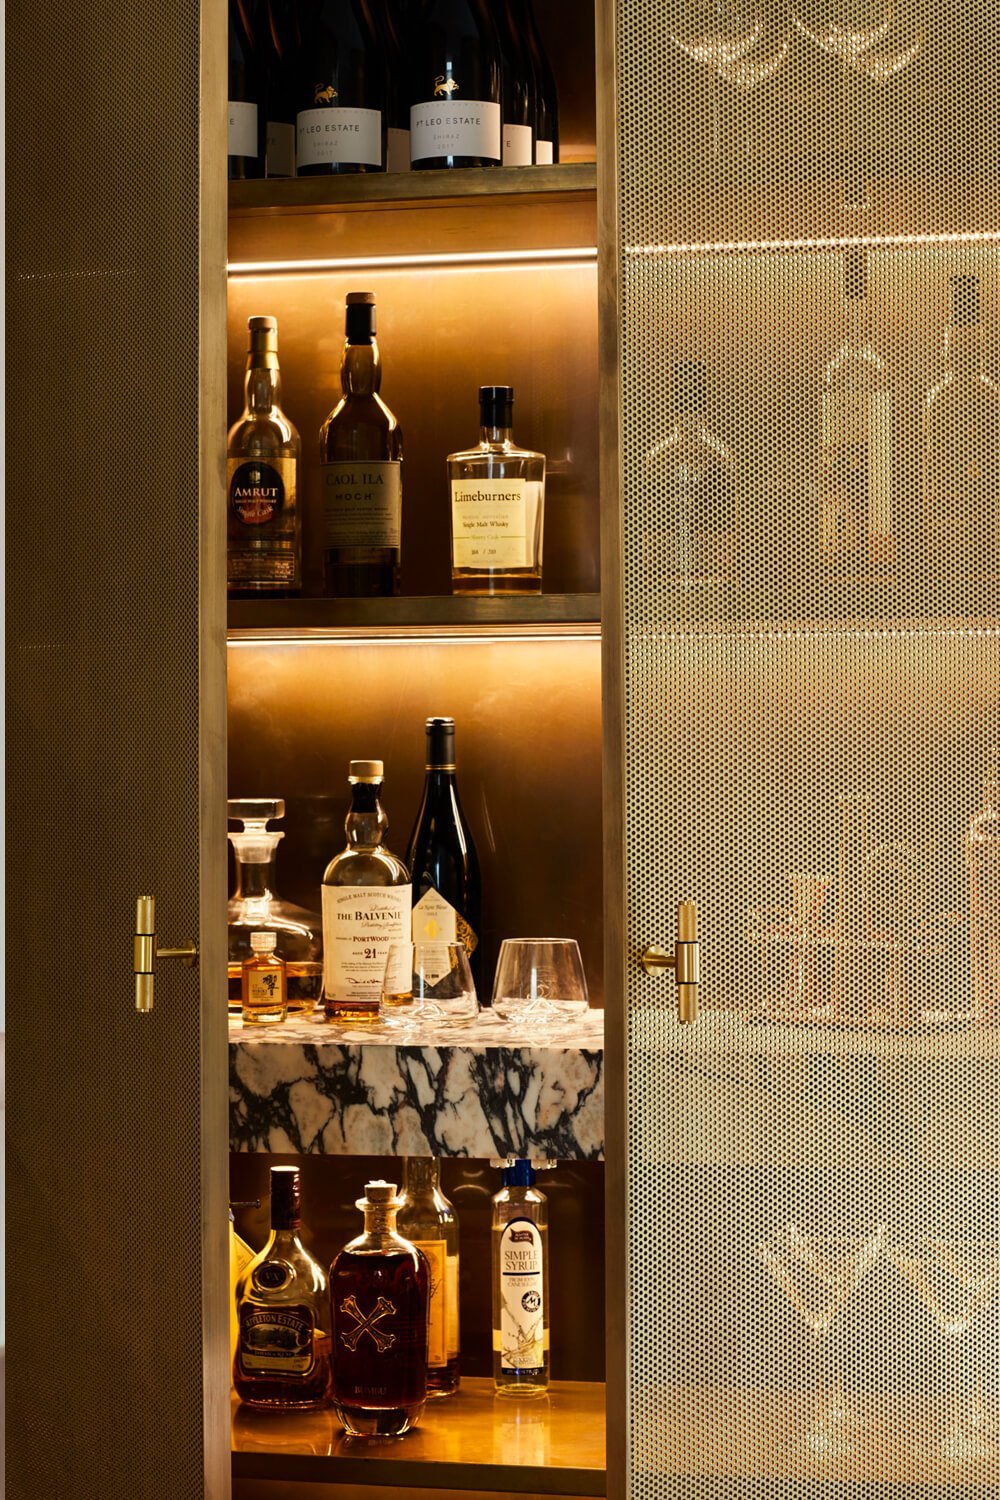 Luxurious Accessories You Need for Your Home Bar